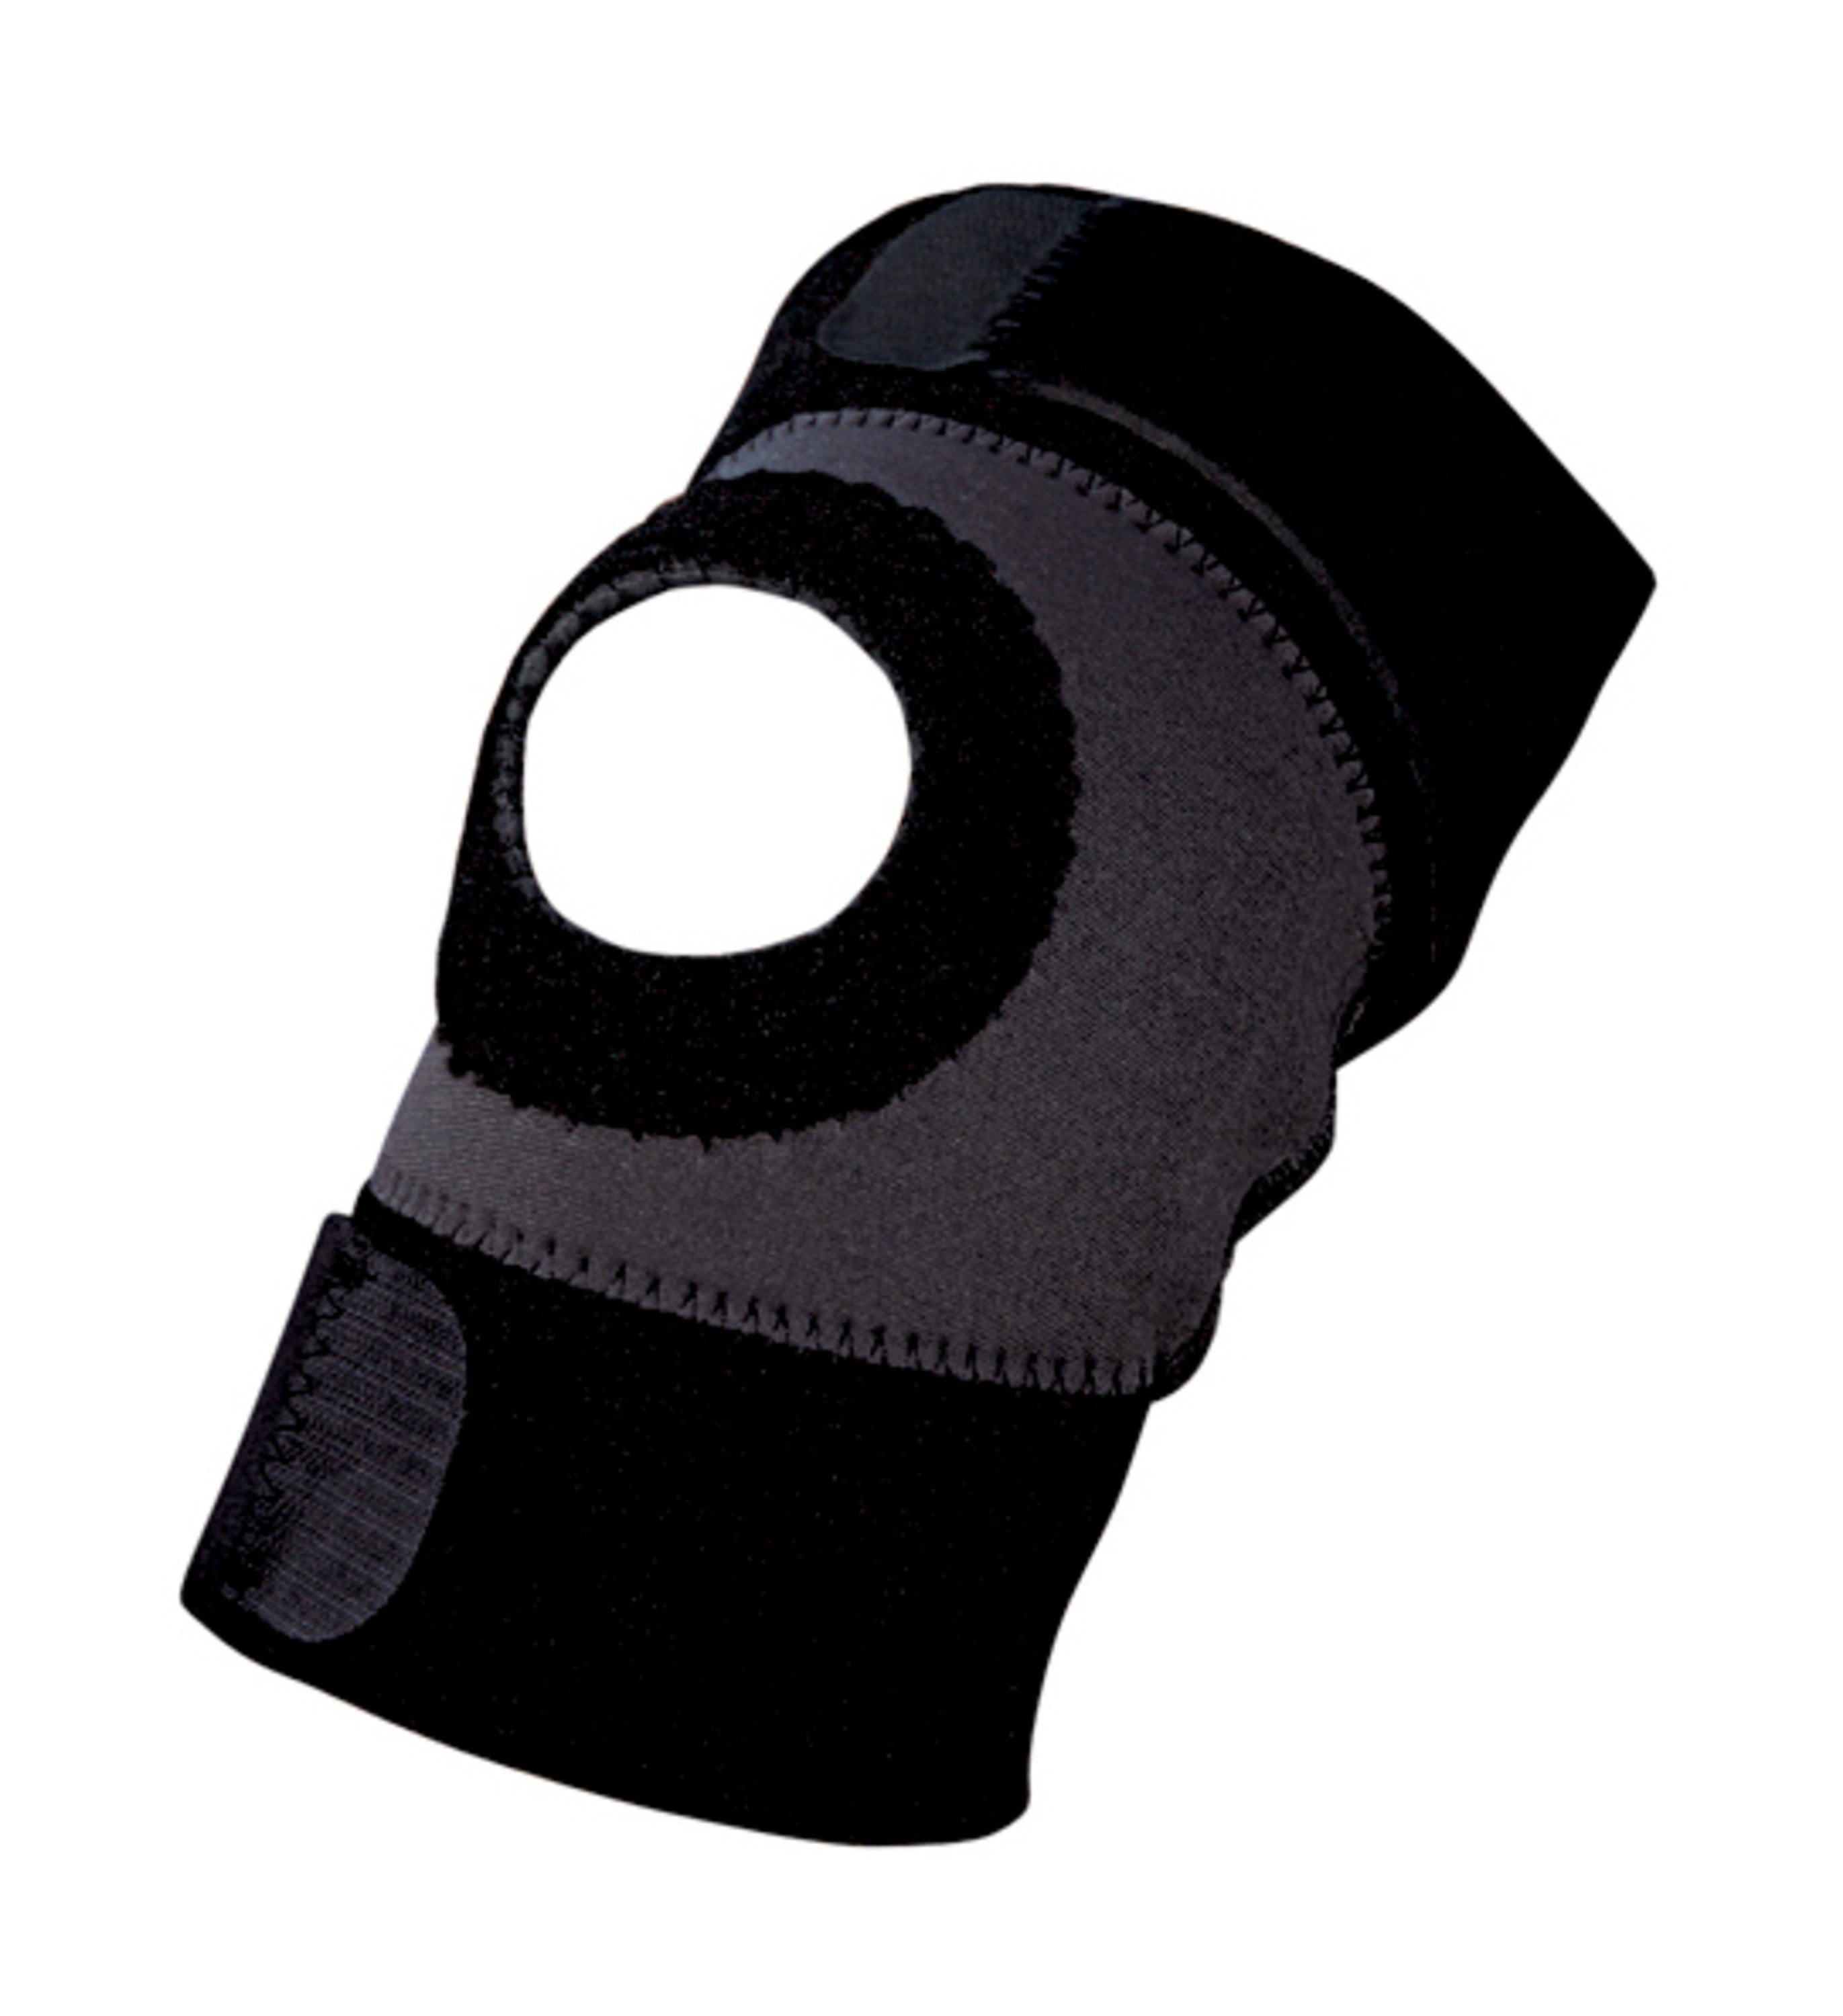 ACE Adjustable Knee Support with Side Stabilizers, Provides Extra ...